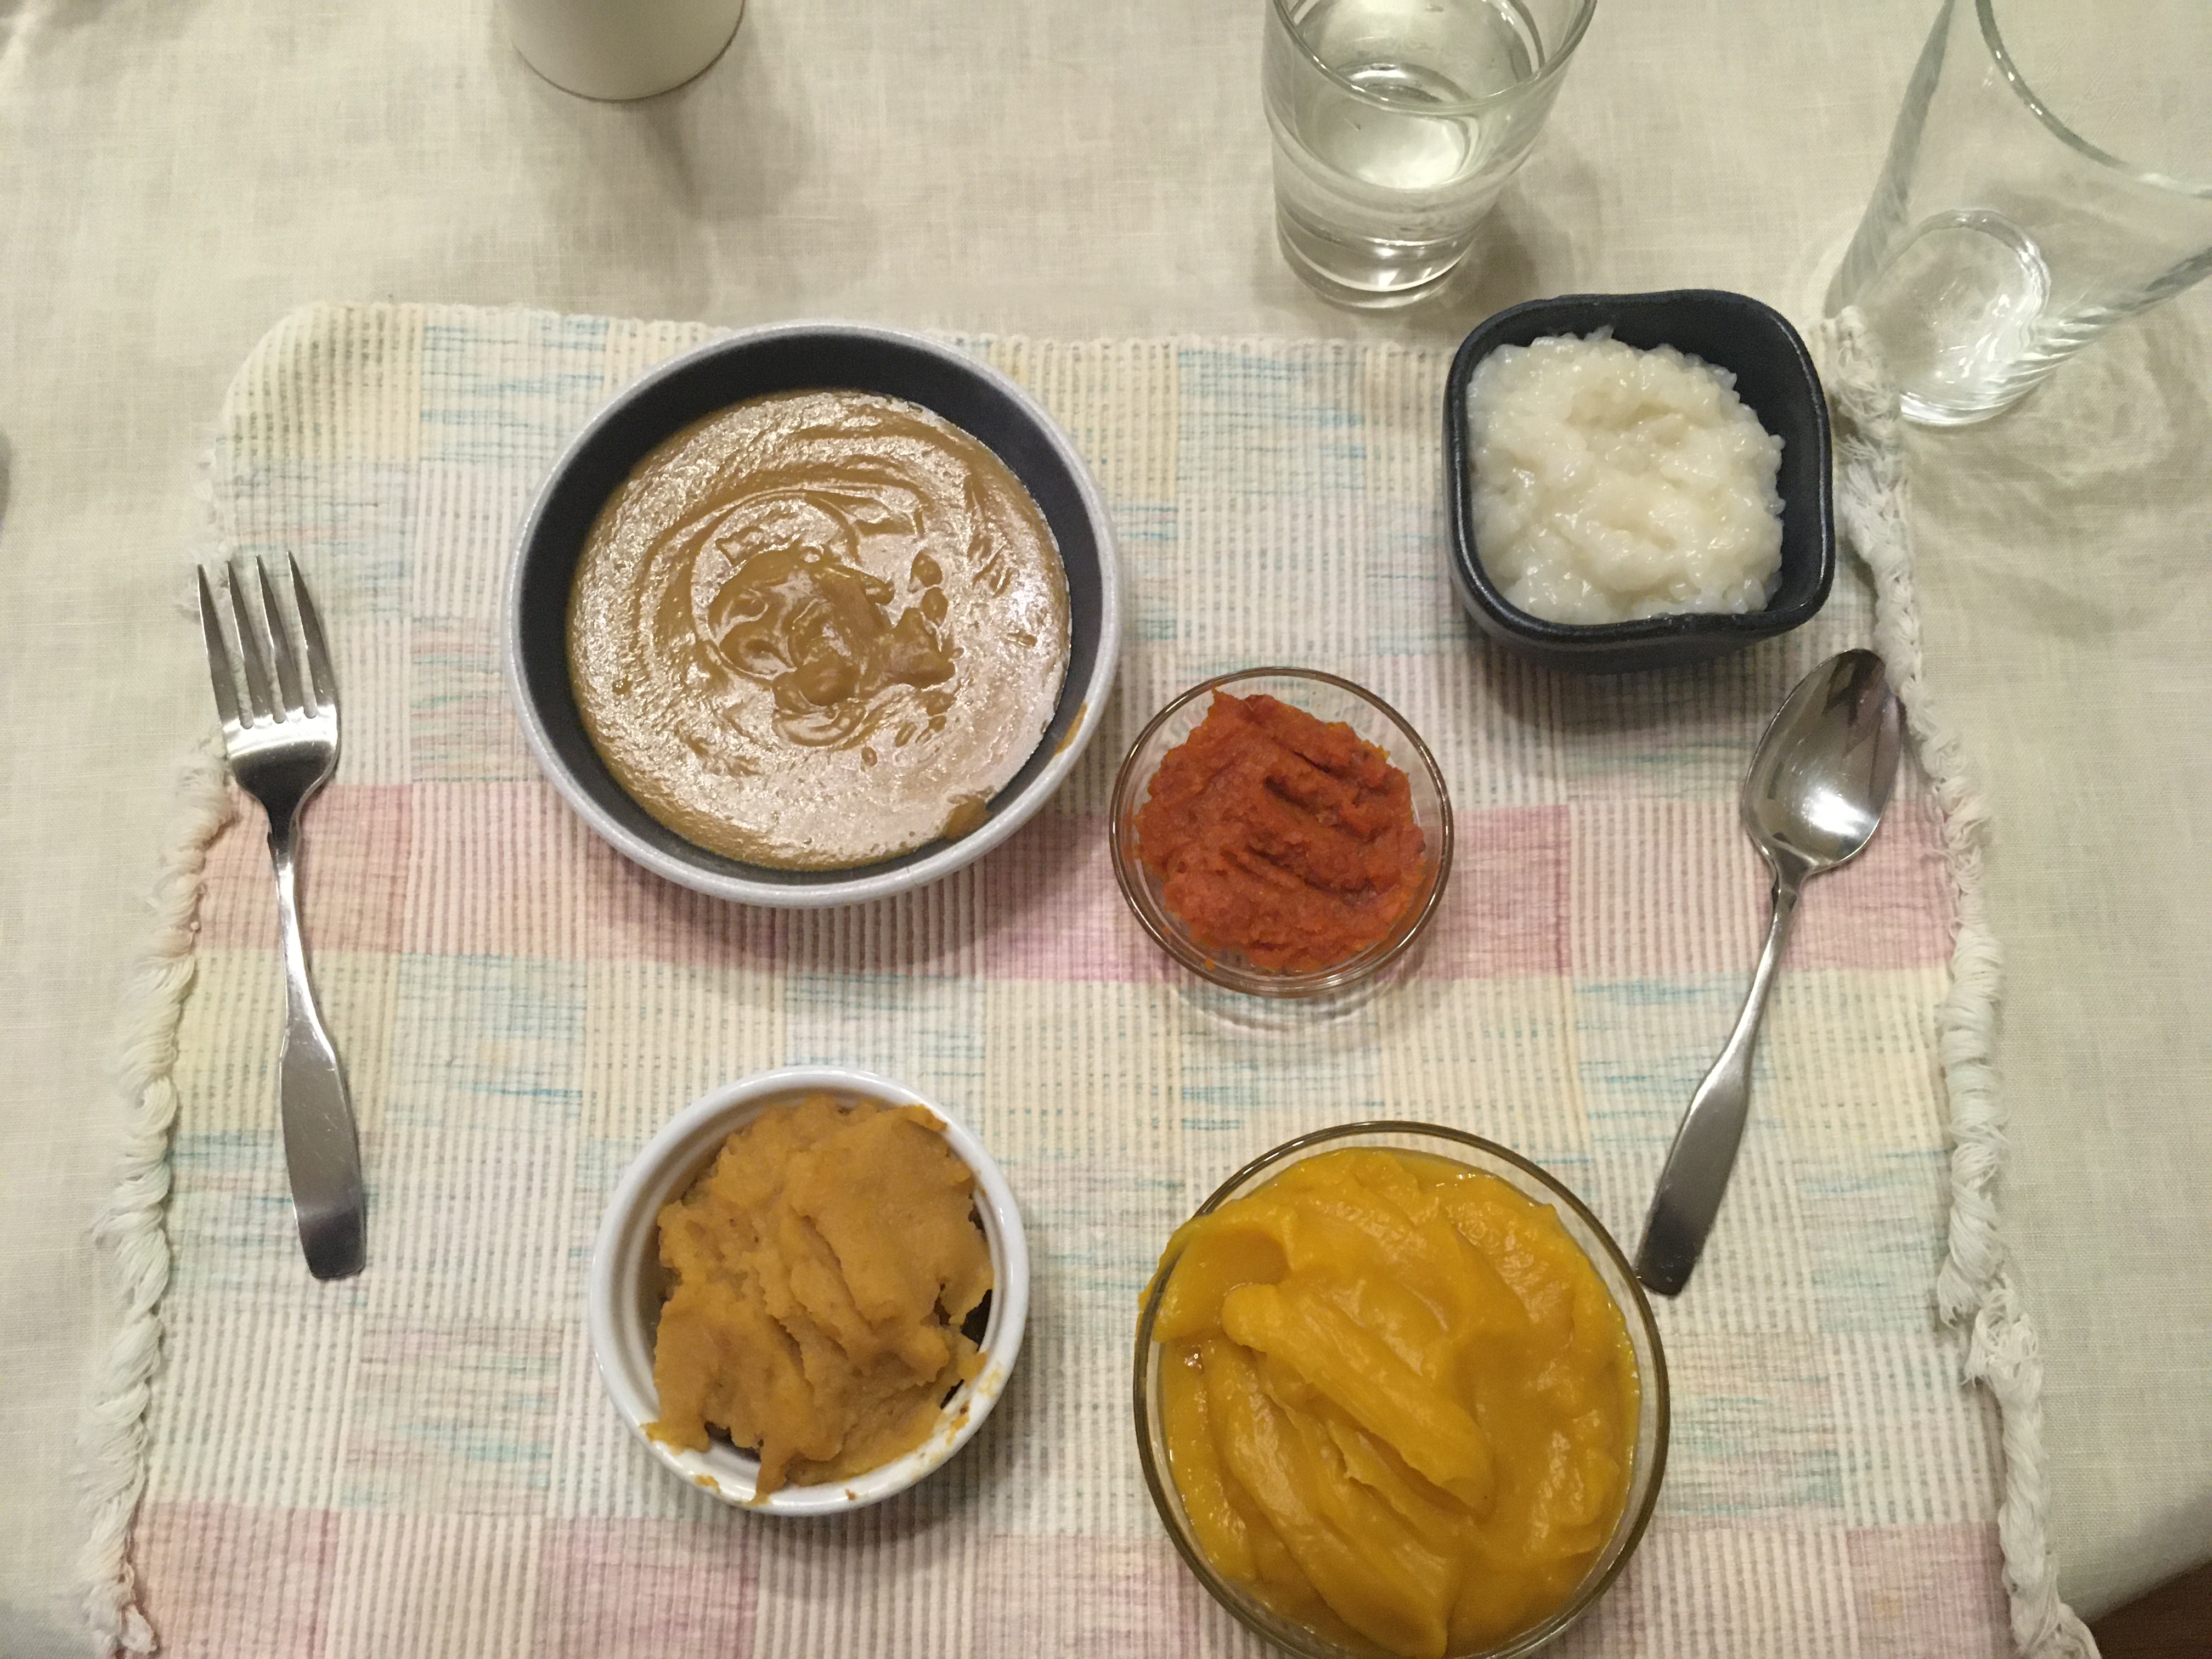 White placemat with 5 small bowls of pureed foods in different shades of orange/brown/white.